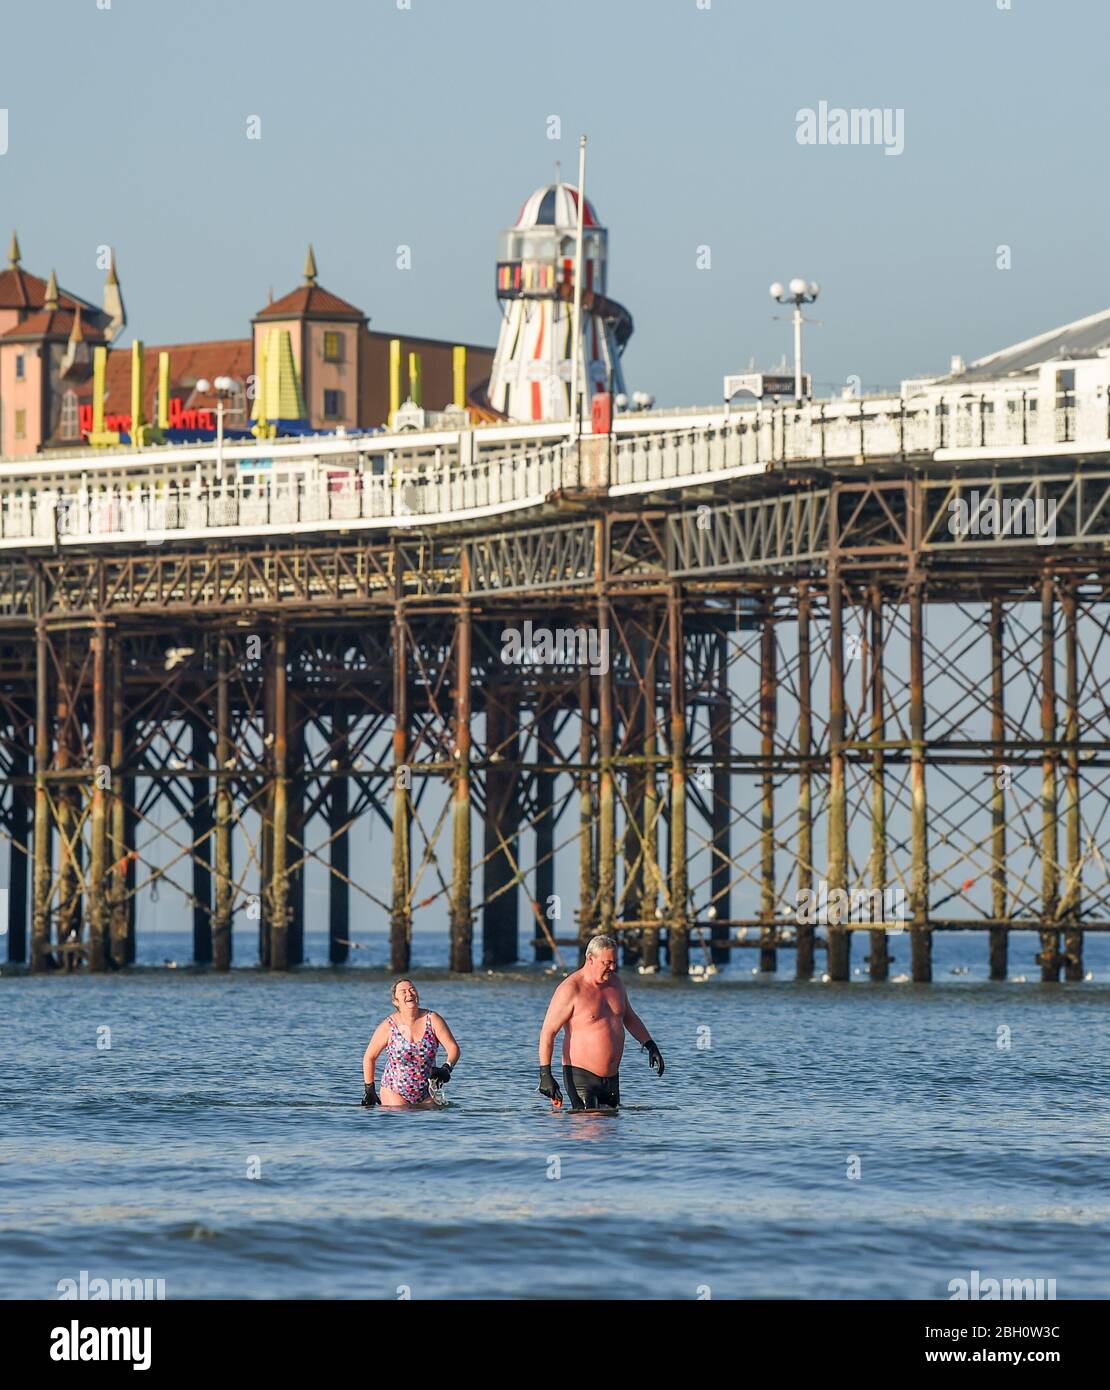 Brighton UK 23rd April 2020 - Early morning swimmers enjoy a dip in the sea by Brighton Palace Pier on a beautiful hot sunny day during the lockdown restrictions during the Coronavirus COVID-19 pandemic crisis  . Temperatures are expected to reach 25 degrees in some parts of the South East today .  Credit: Simon Dack / Alamy Live News Stock Photo